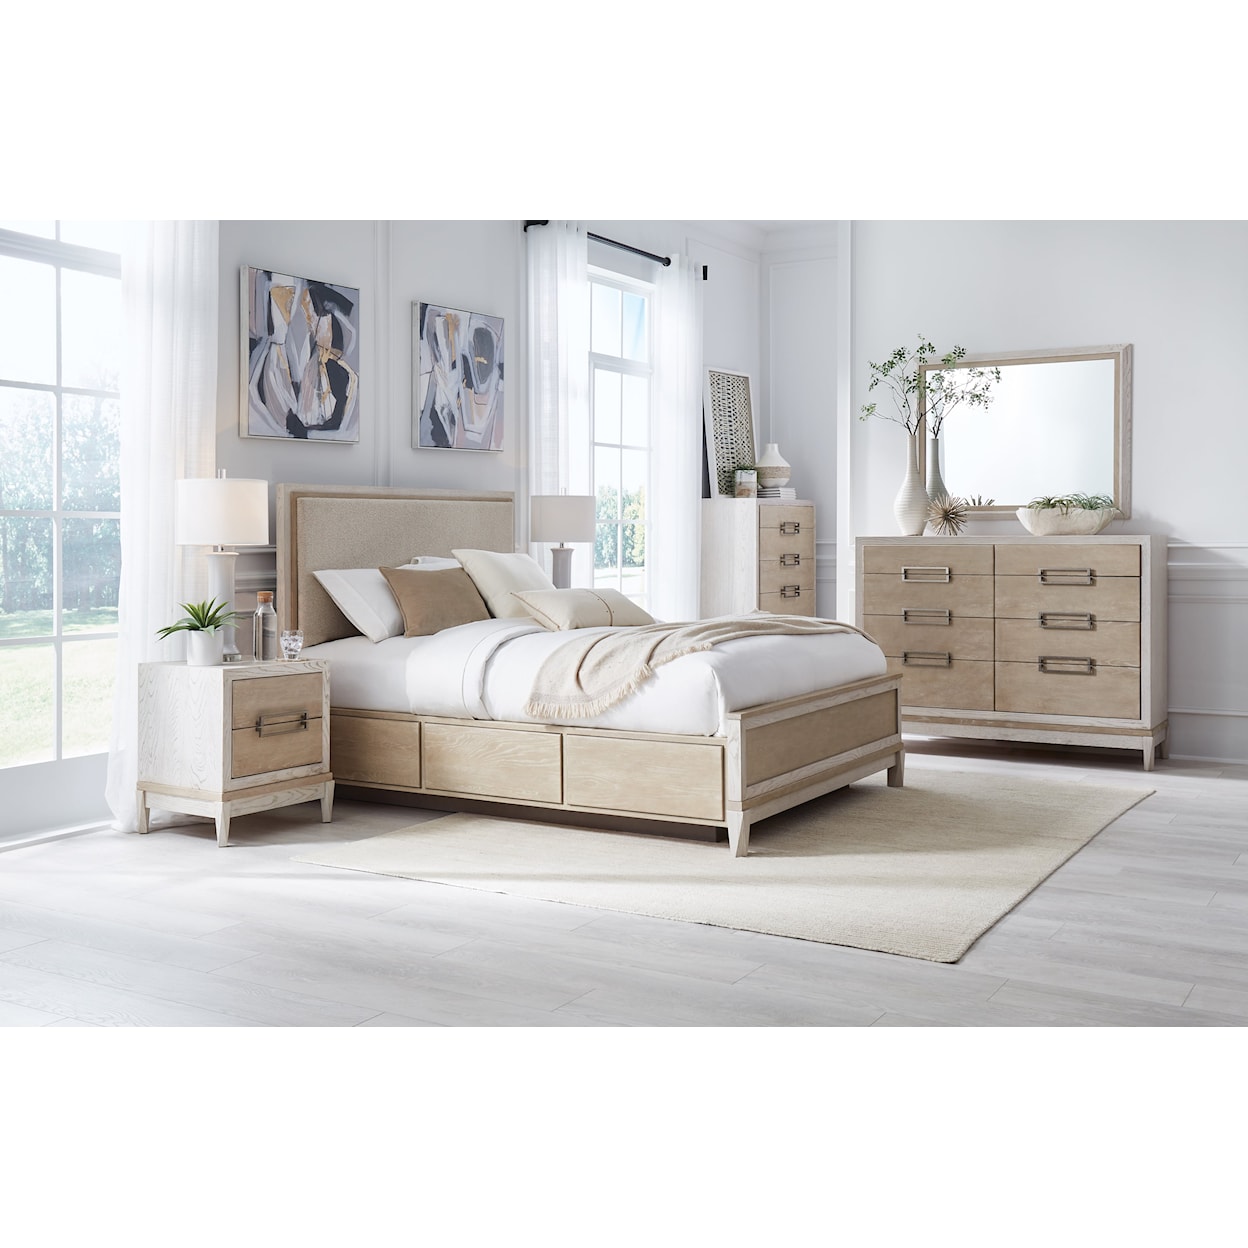 Whittier Wood Catalina Queen Upholstered Panel Storage Bed